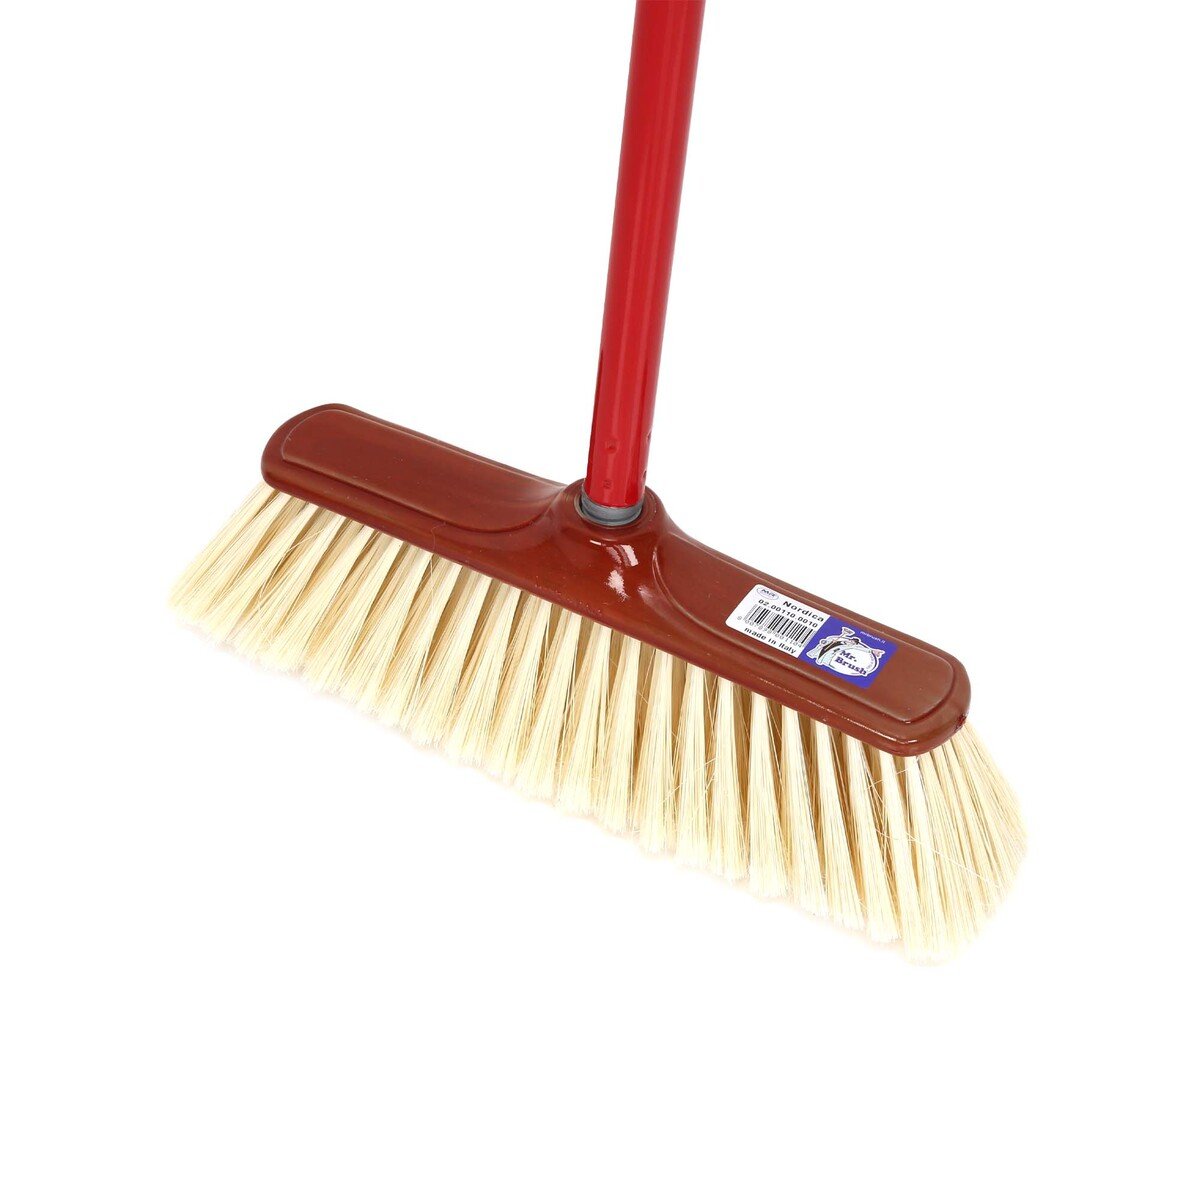 Mr.Brush 110.10 Nordica Soft Broom with long Stick, Assorted colors